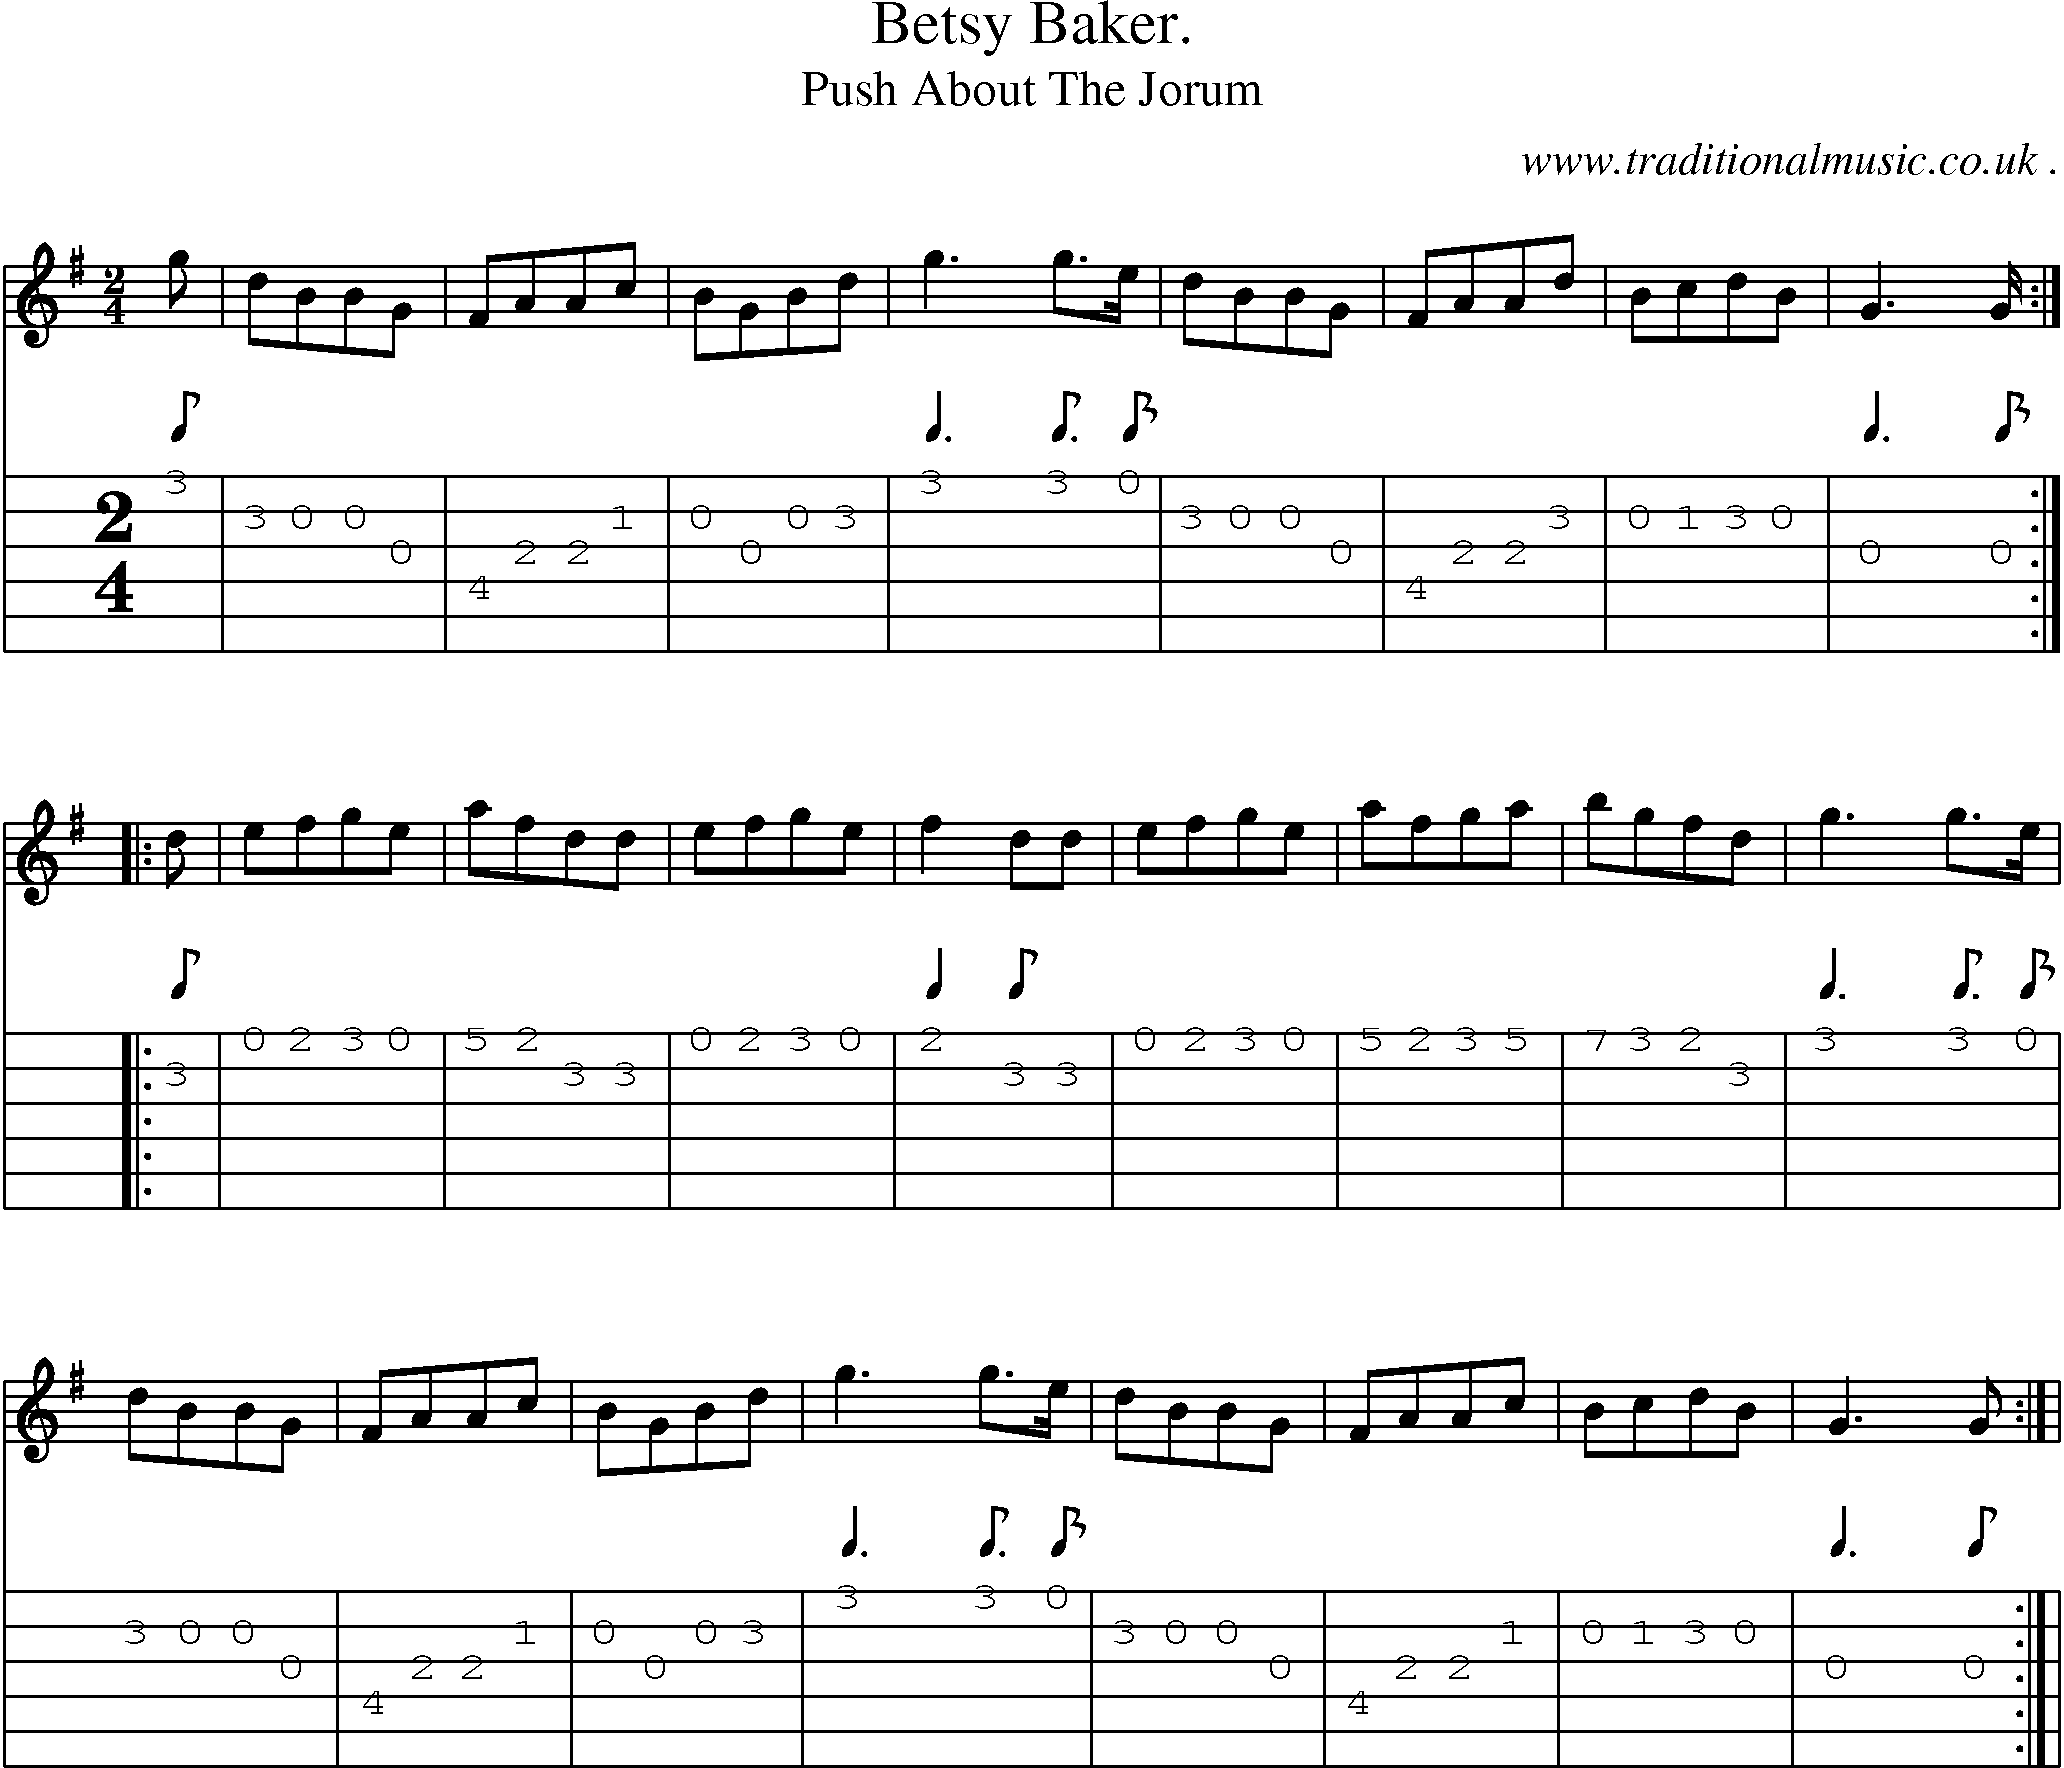 Sheet-Music and Guitar Tabs for Betsy Baker